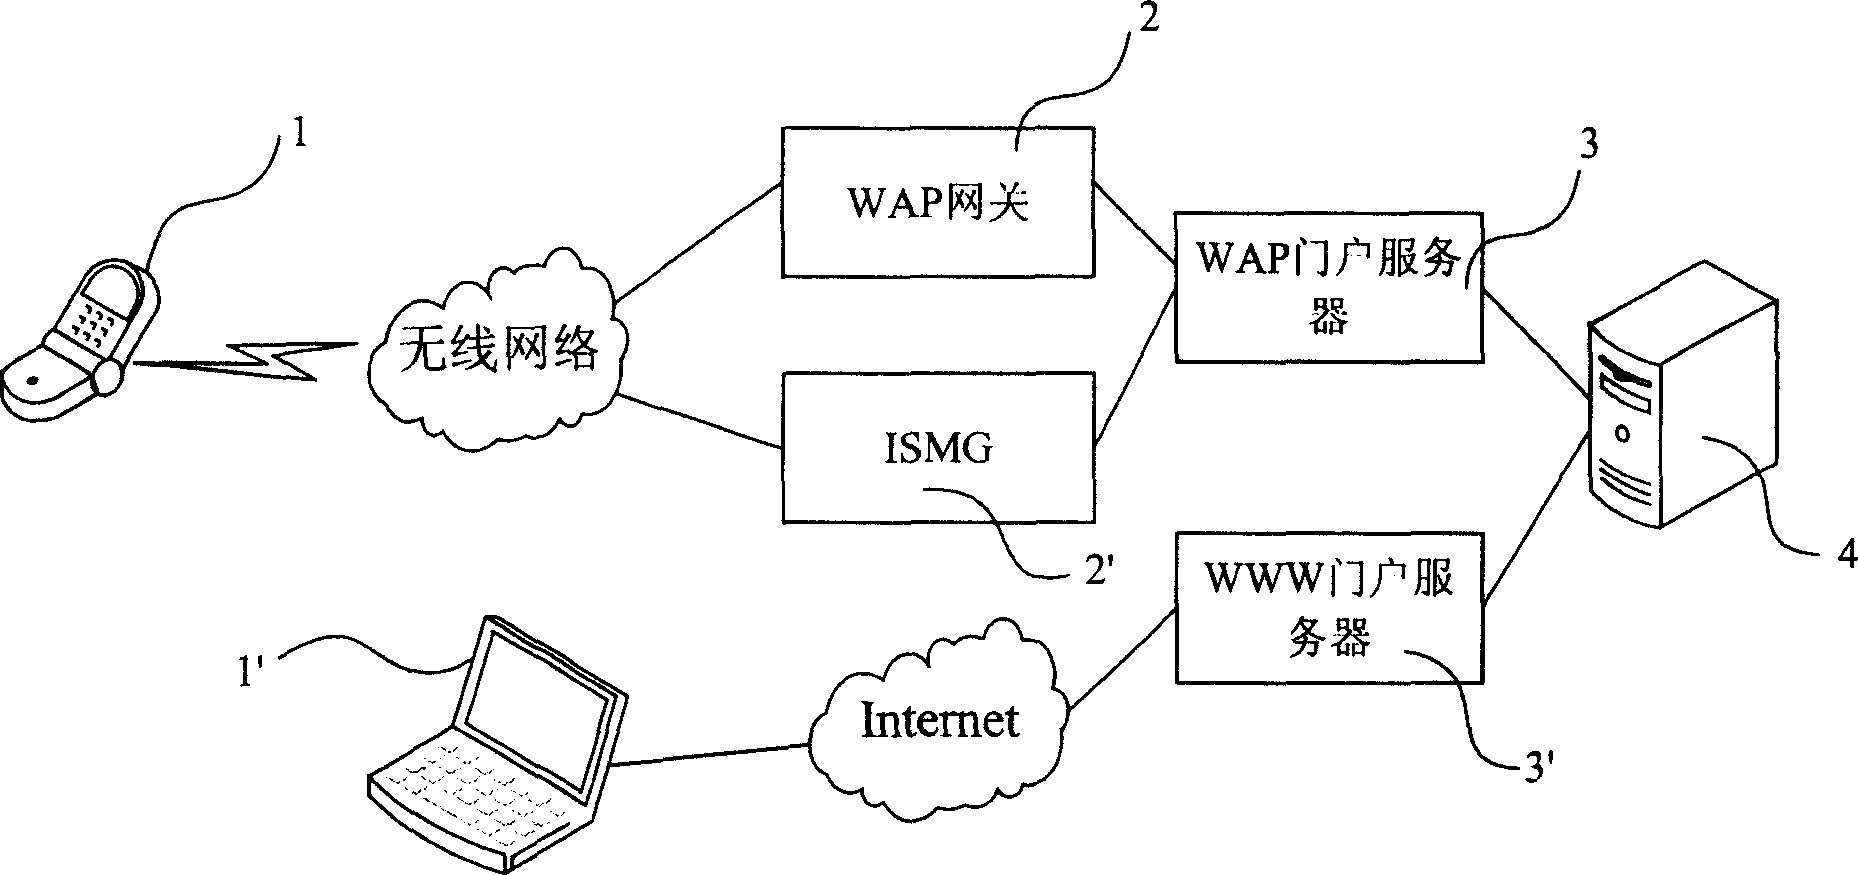 Method for associating user information based on user's operating characters